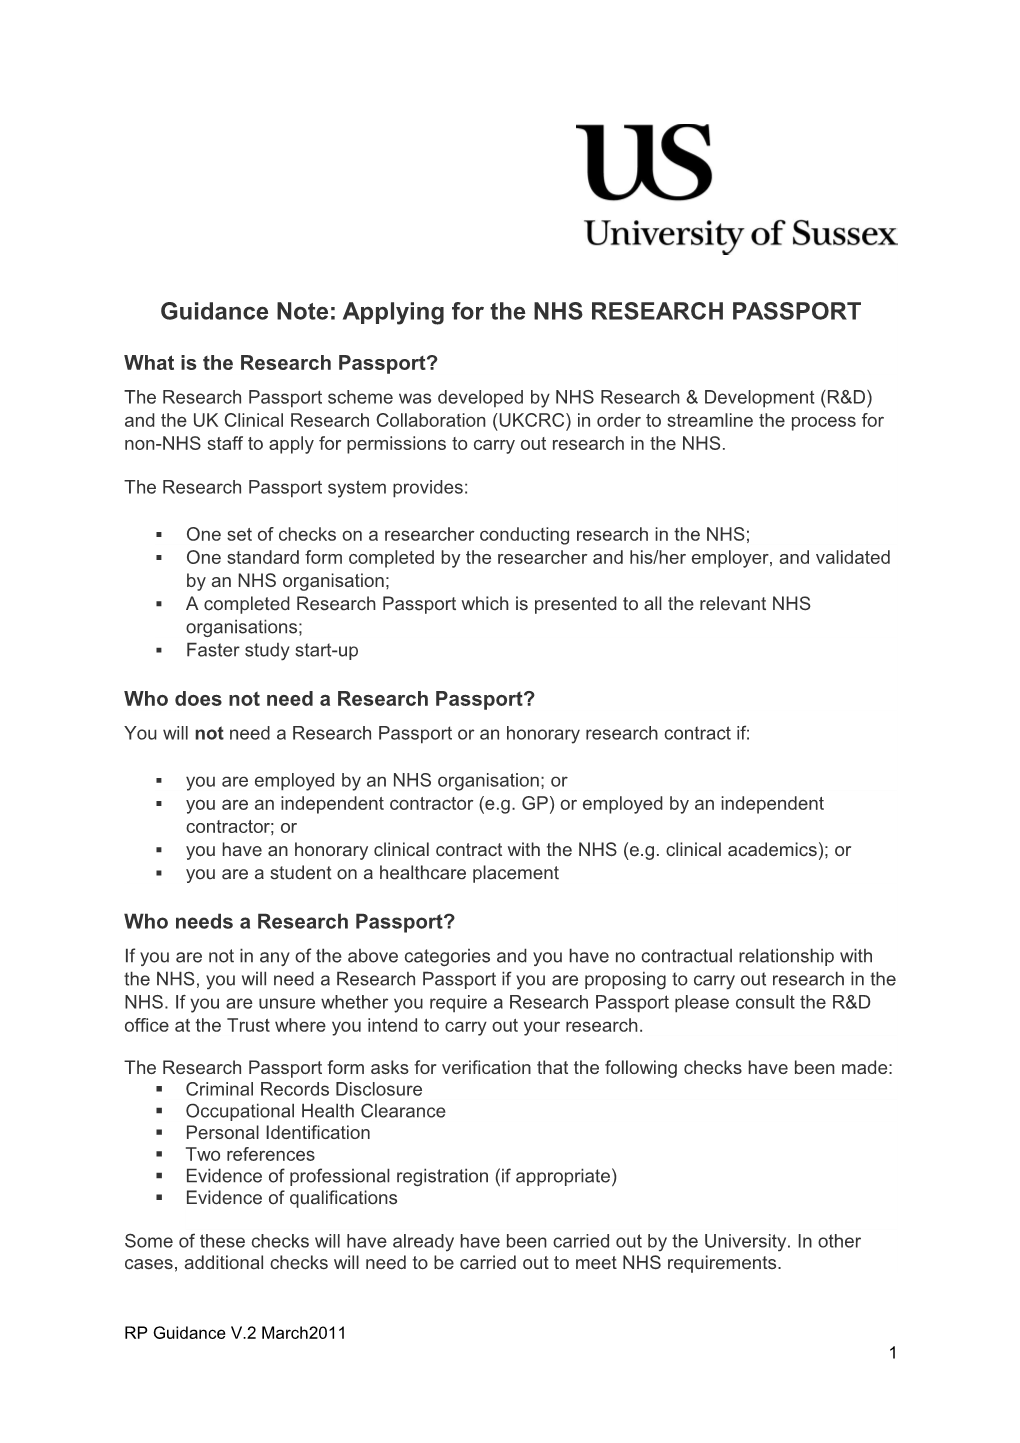 Guidance Note:Applying for the NHS RESEARCH PASSPORT